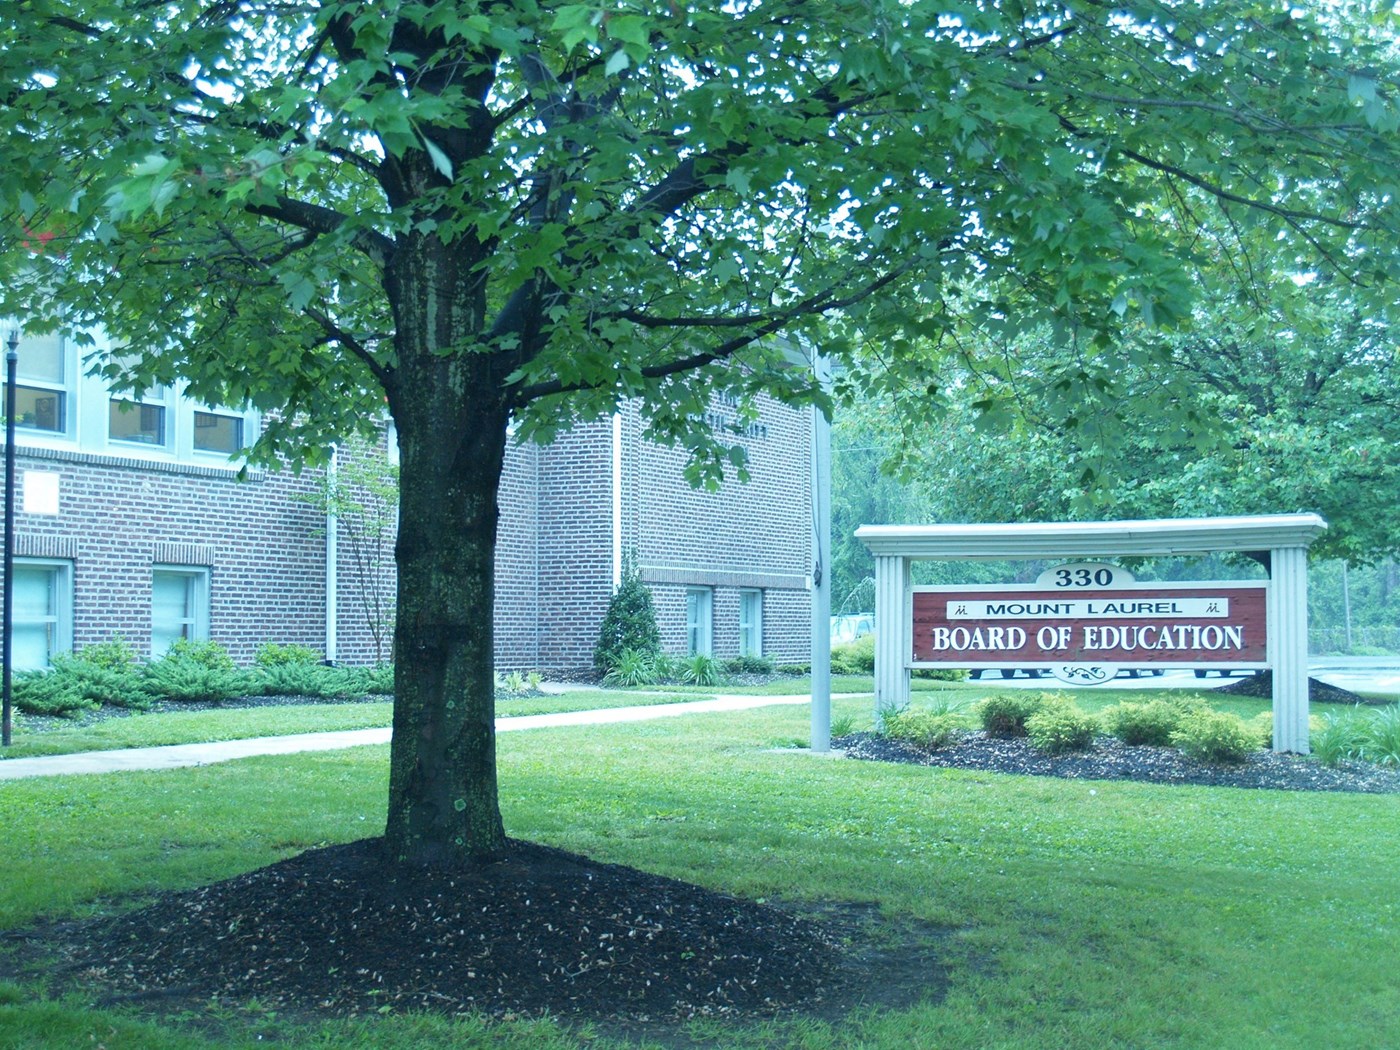 330 Mount Laurel Board of education Sign - Image of District building, sign and garden with oak tree in centre of mage